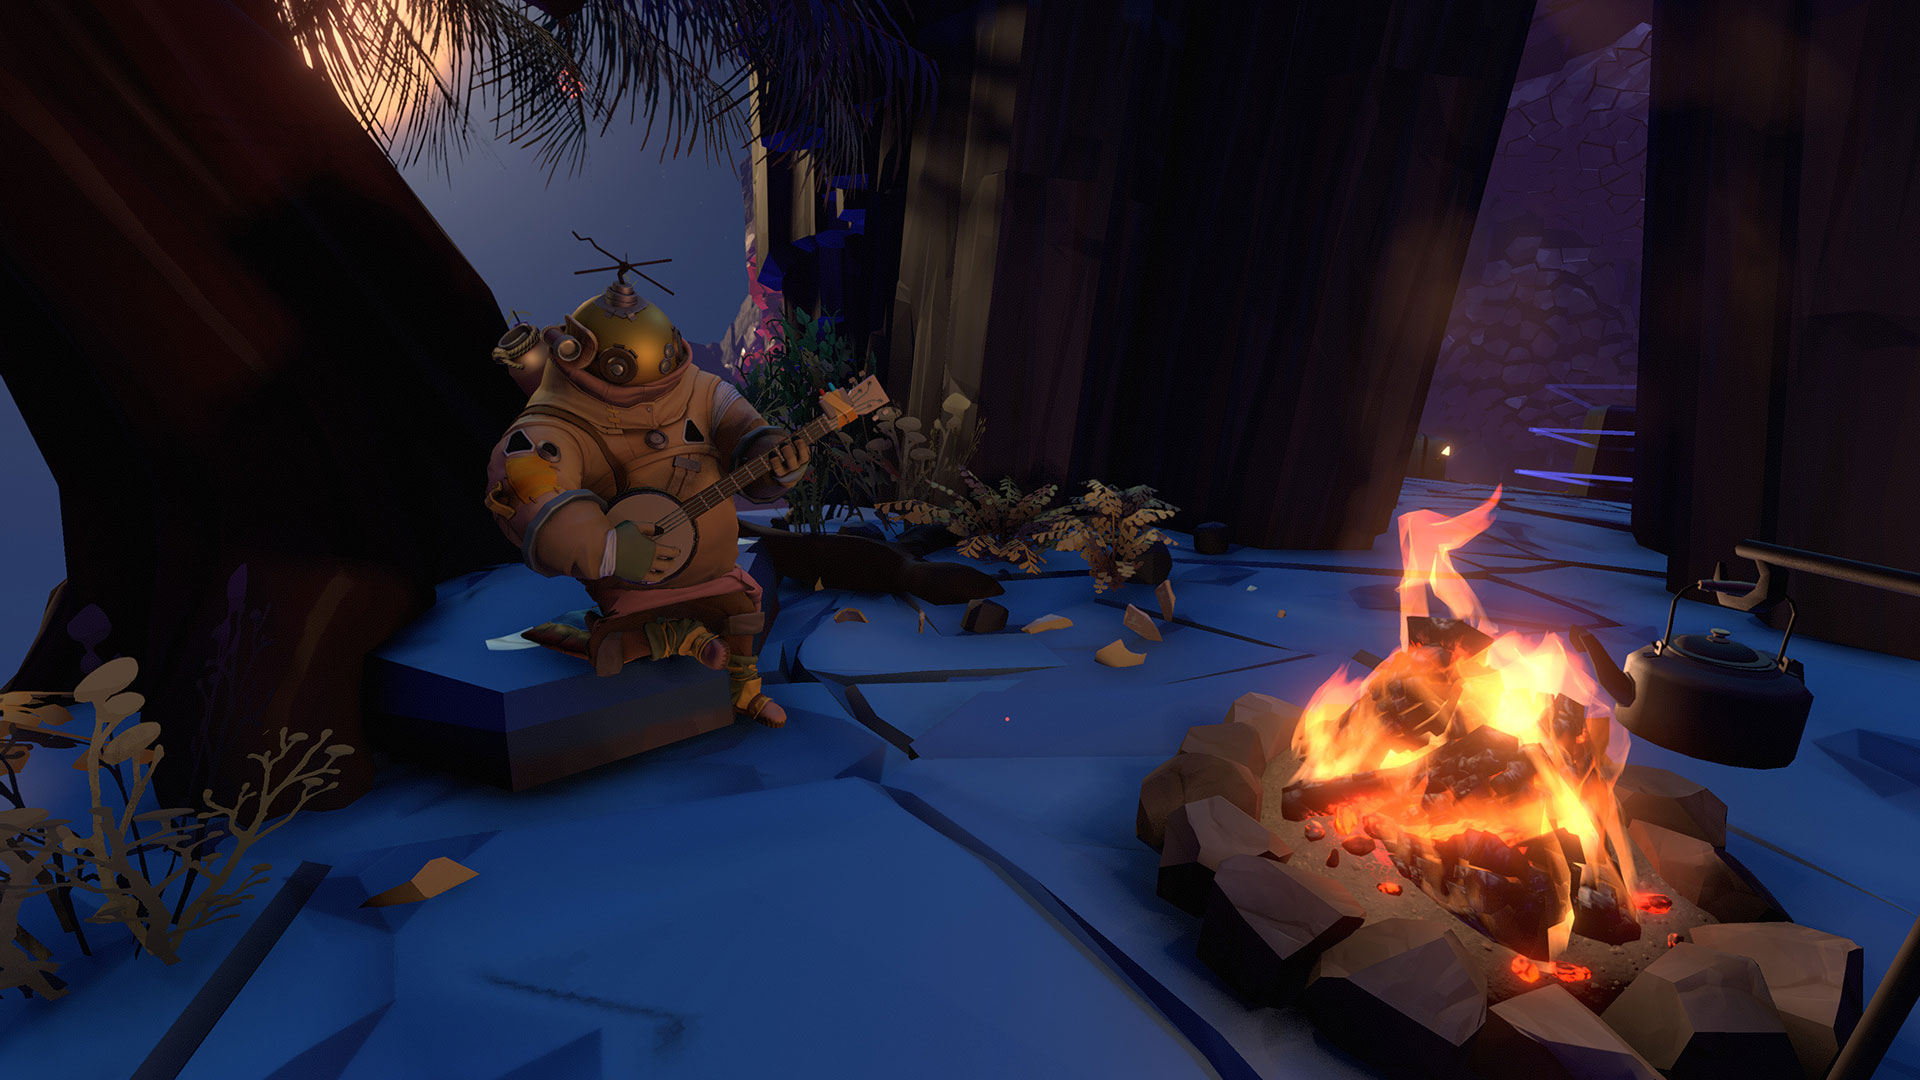 My Favorite Games to Play on the Steam Deck - Outer Wilds